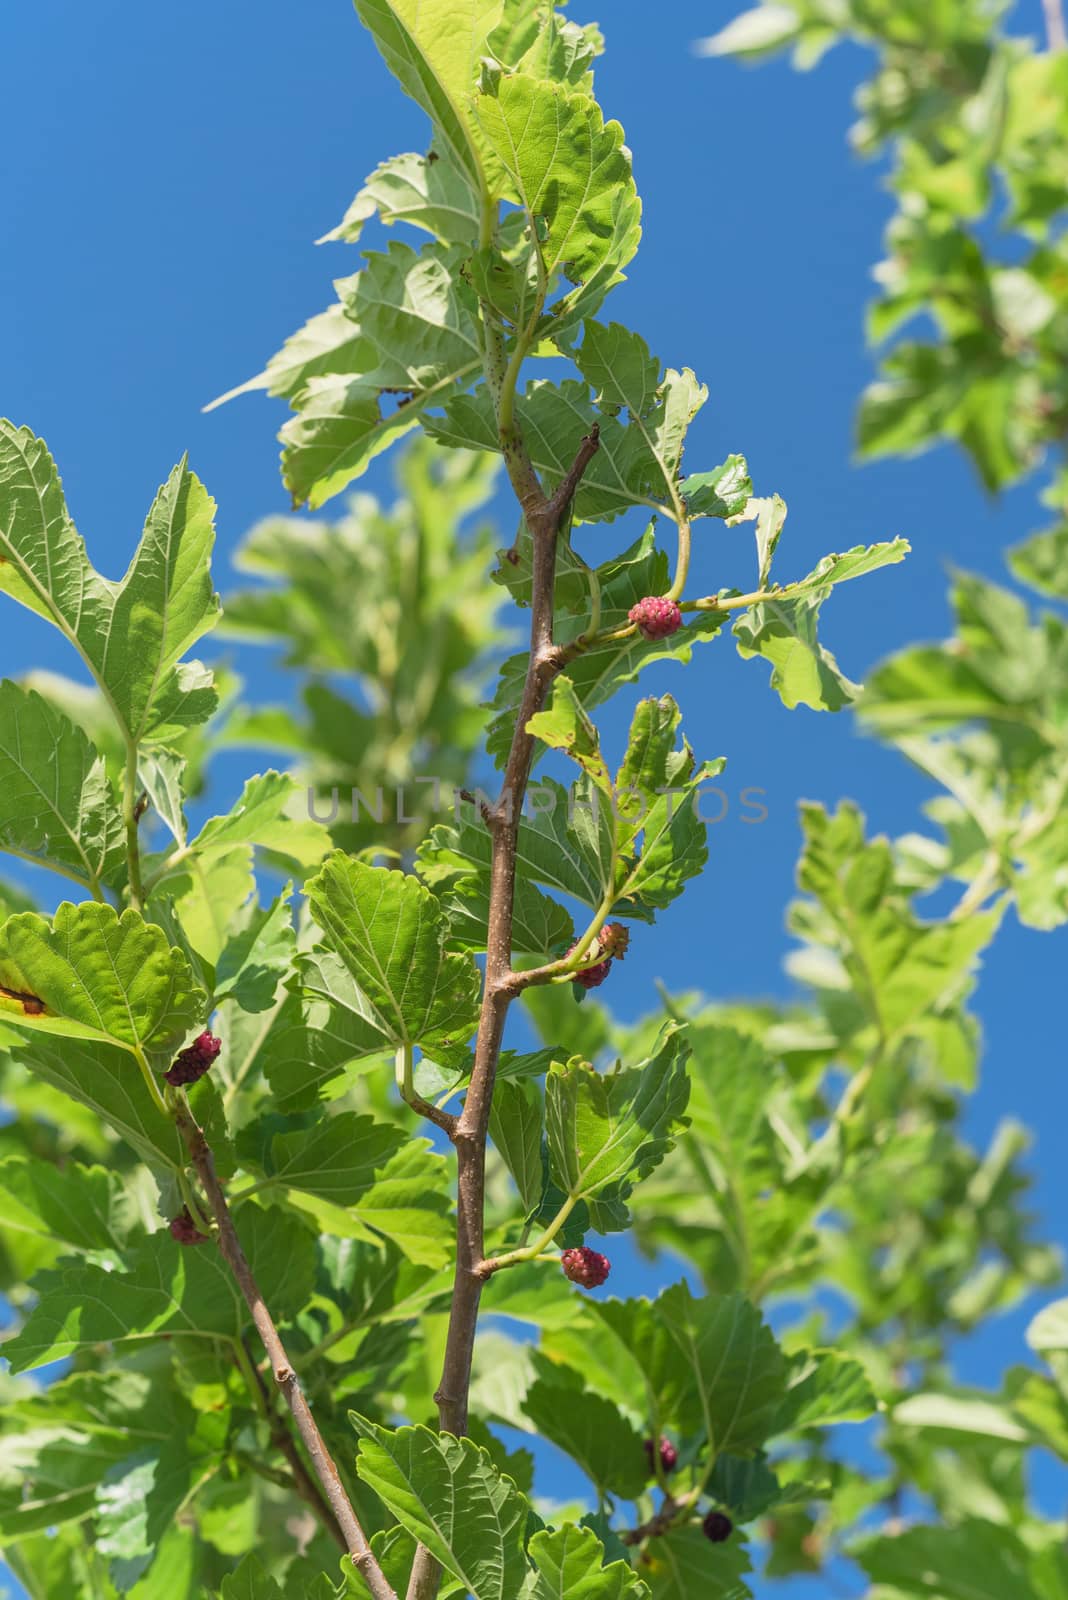 Close-up view of sweet black mulberry morus nigra growing on tree branches near Dallas, Texas, America. Mulberries fruits ready to pickup in May harvest season